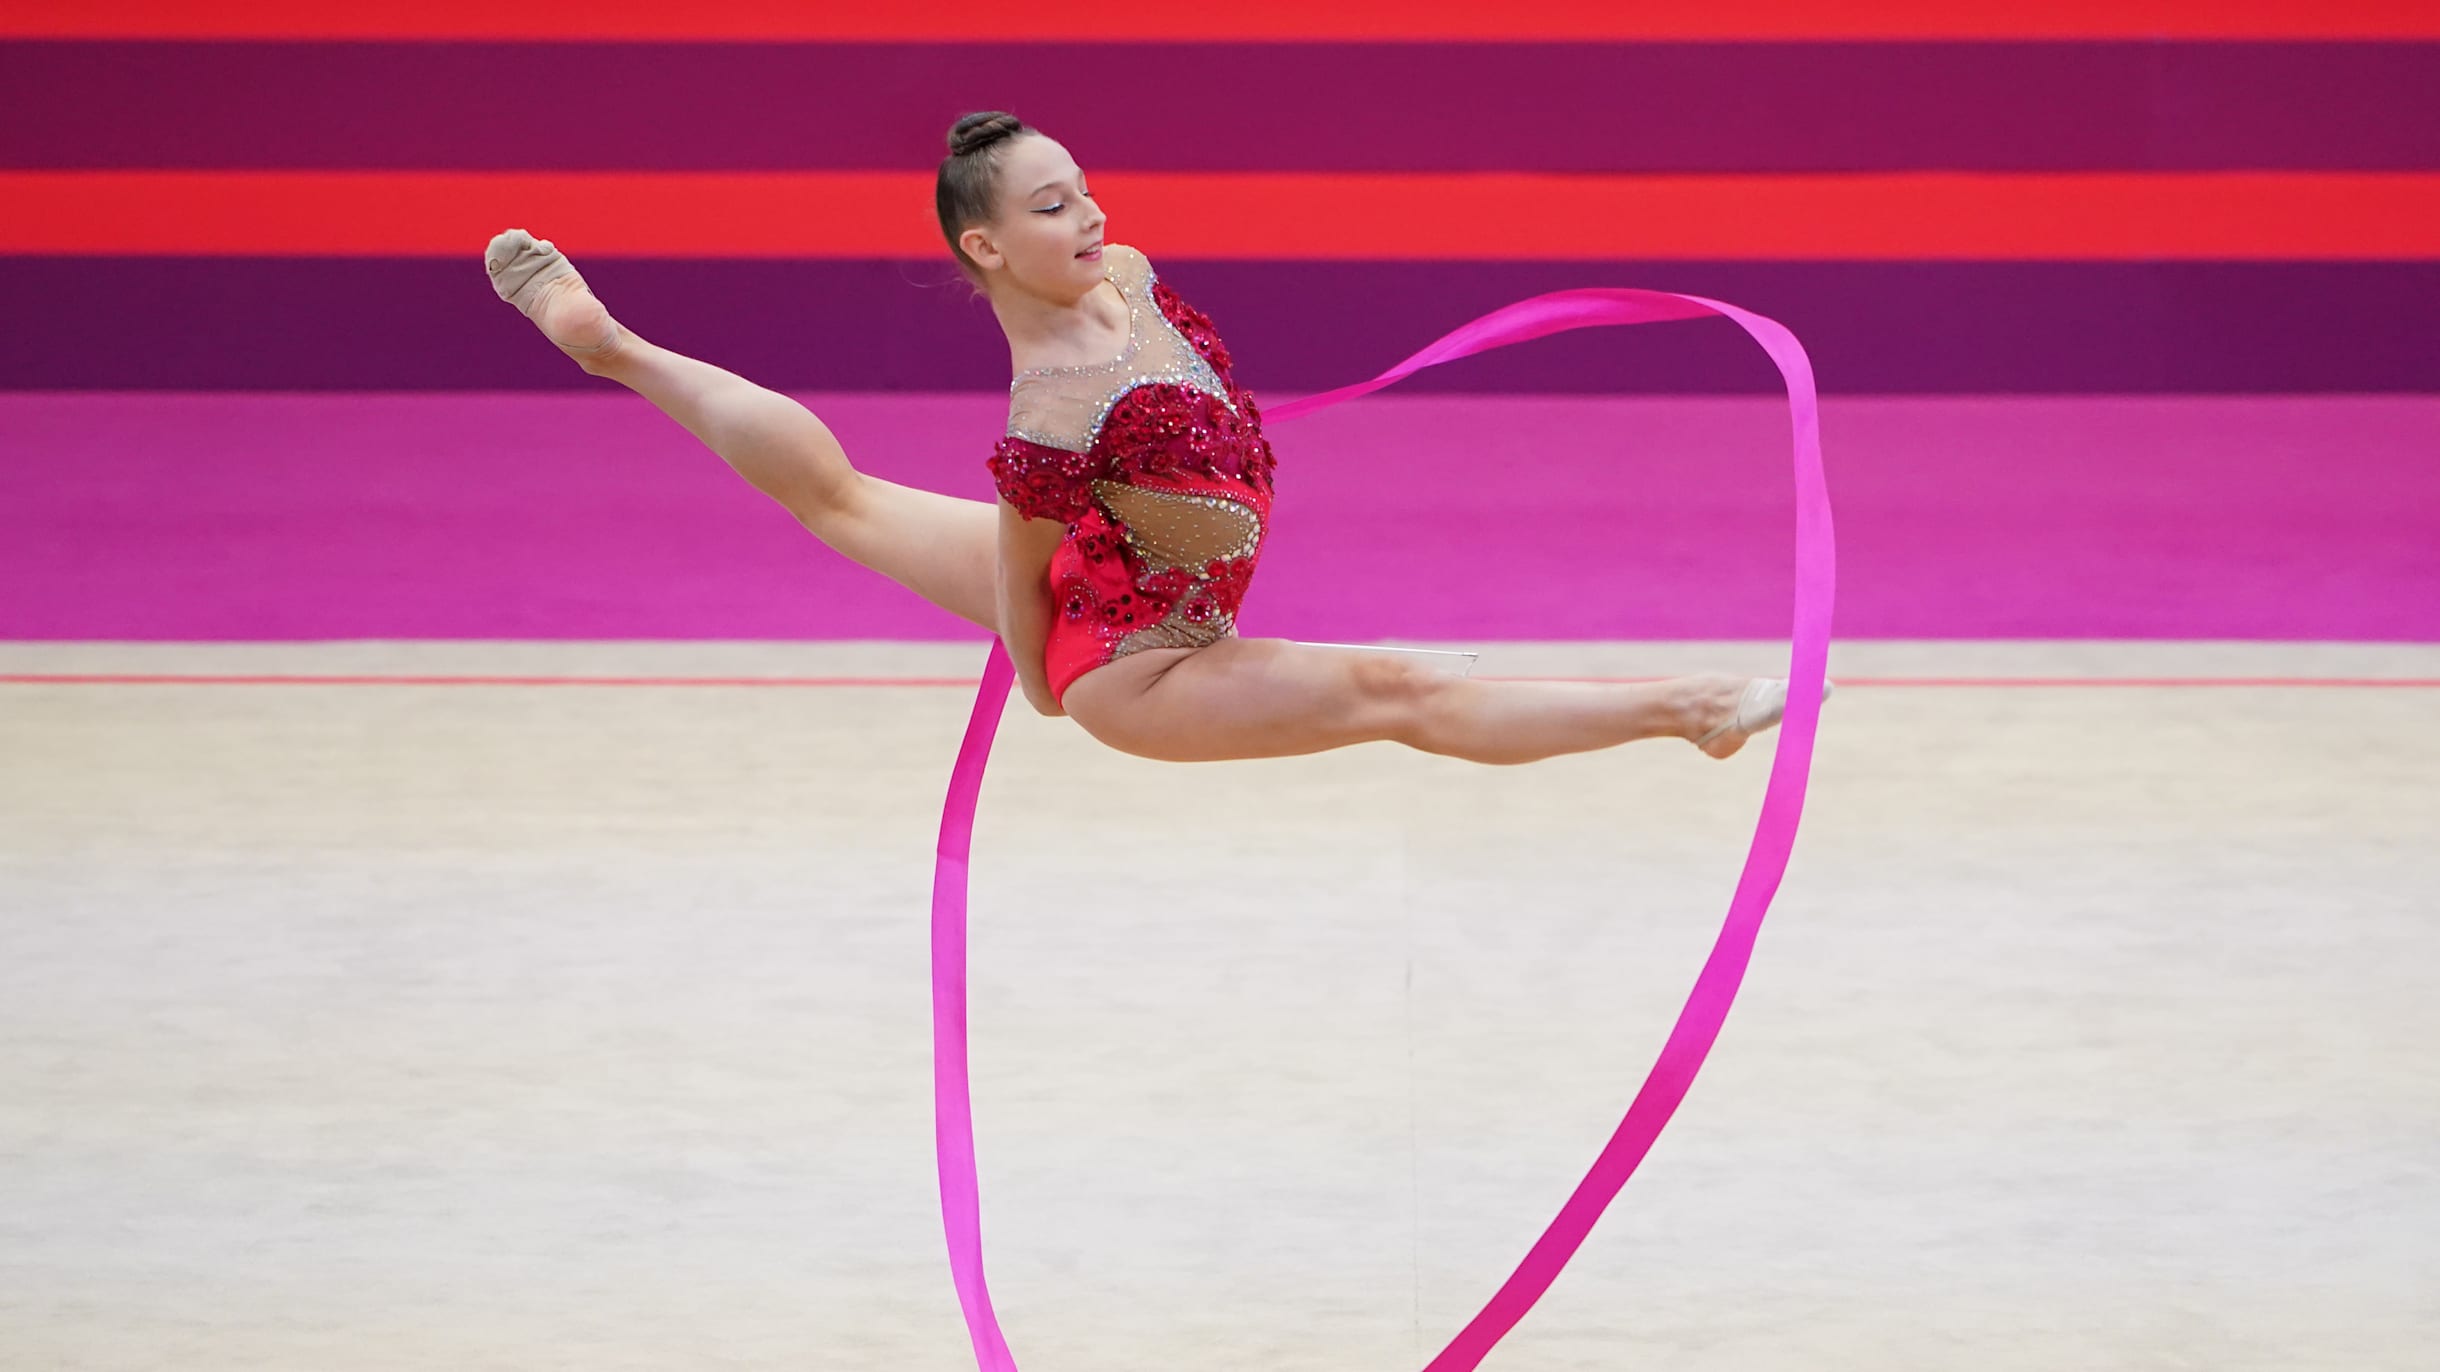 Rhythmic gymnastics equipment and accessories rich offer here